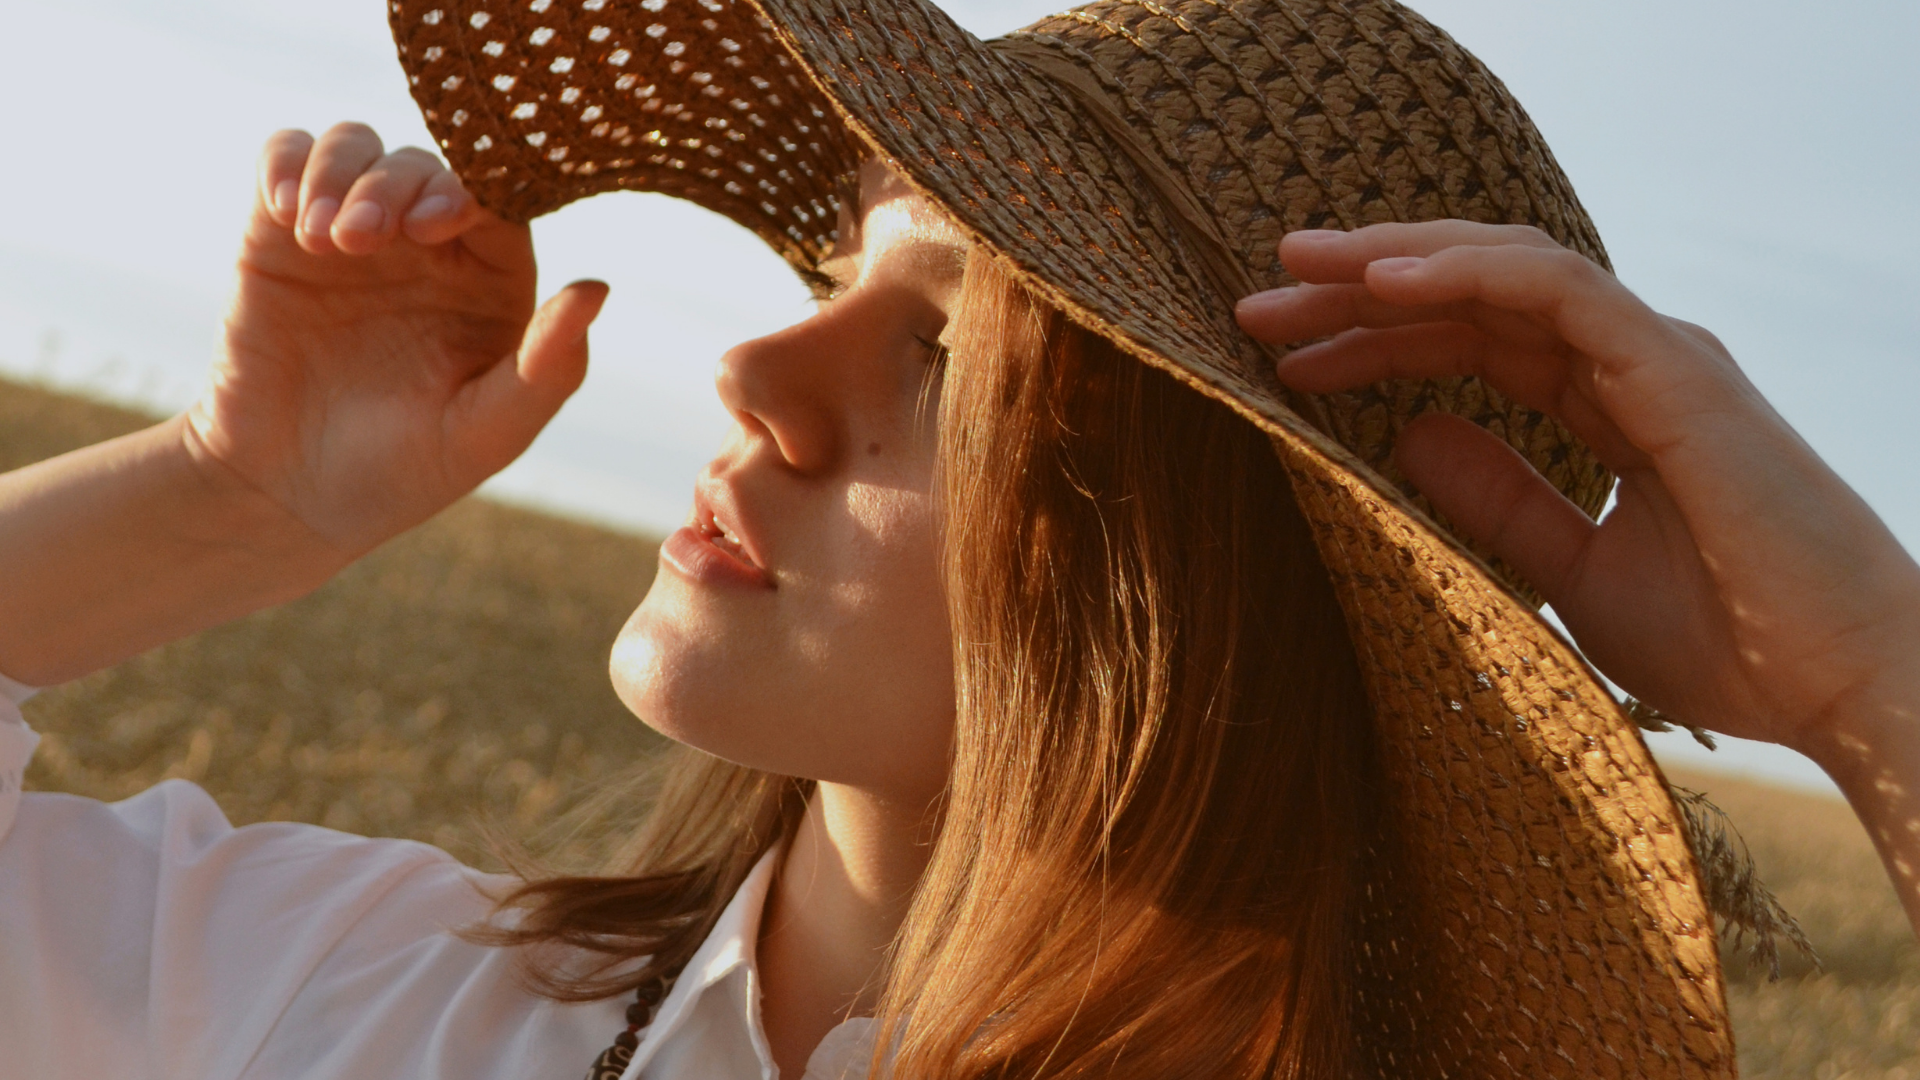 How Redheads Can Layer SPF & Stop Sunscreen Pilling